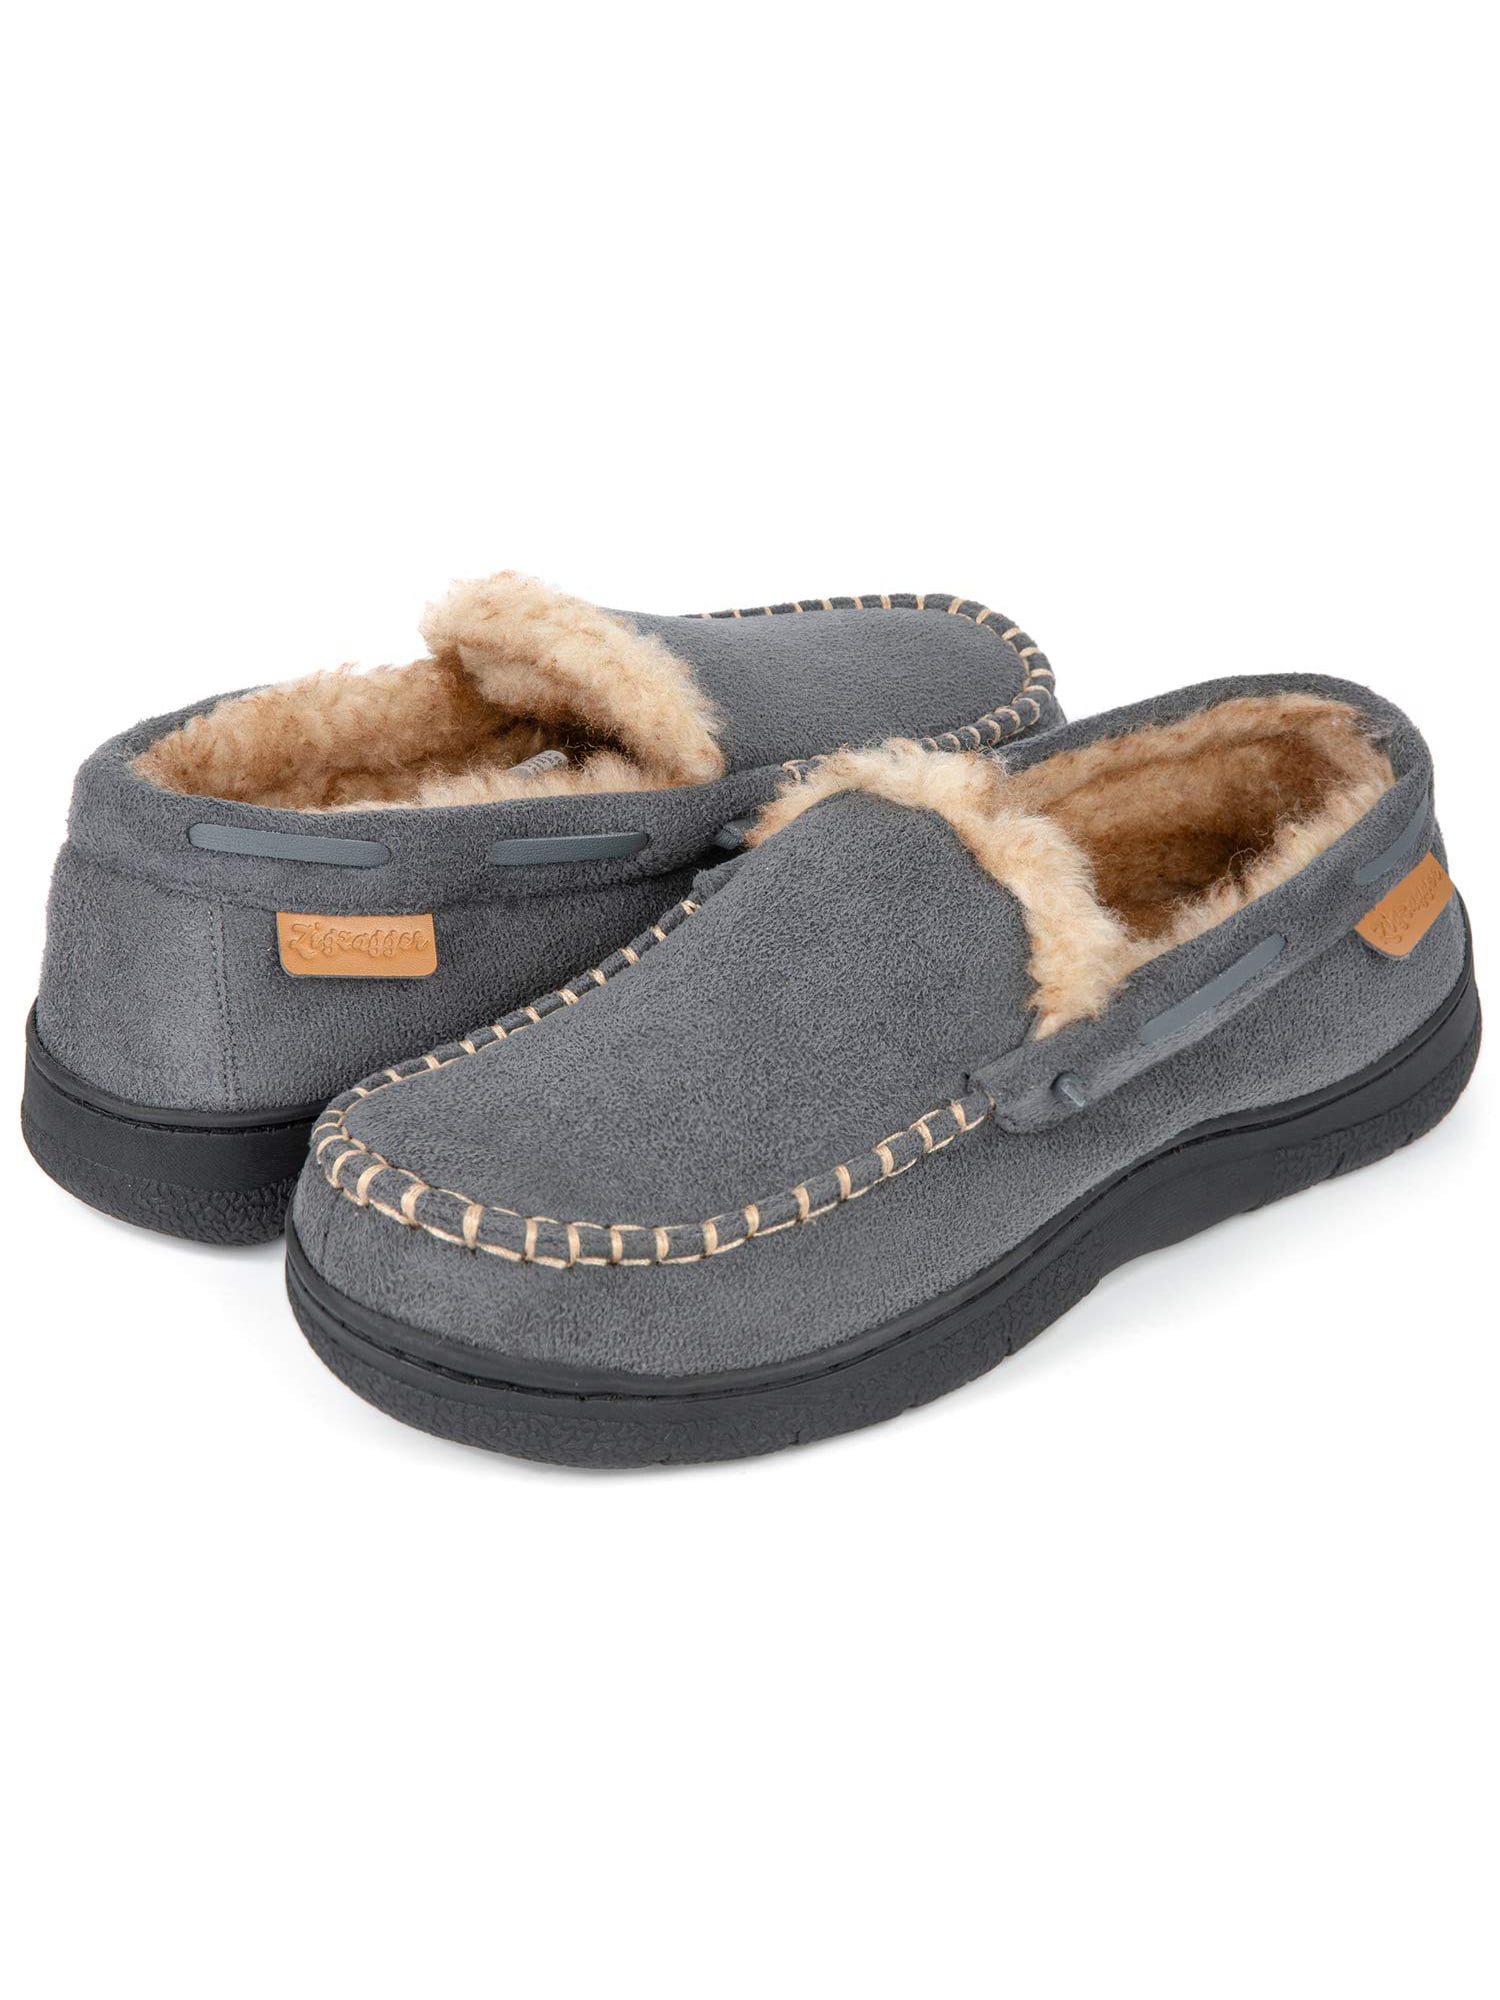 moccasin shoes walmart